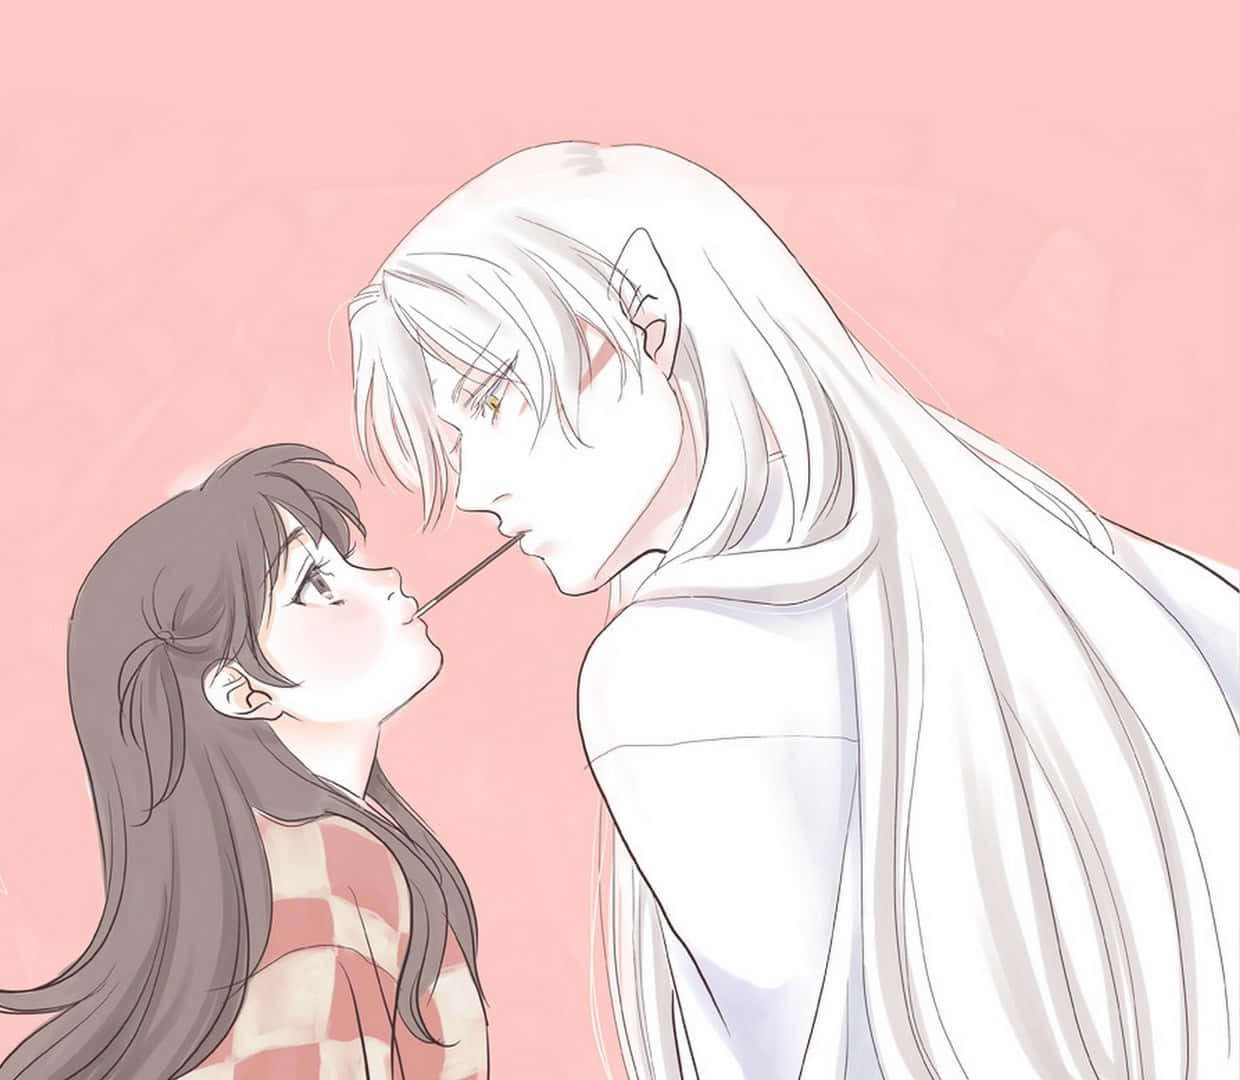 Inuyasha and Rin bonding in a serene moment Wallpaper